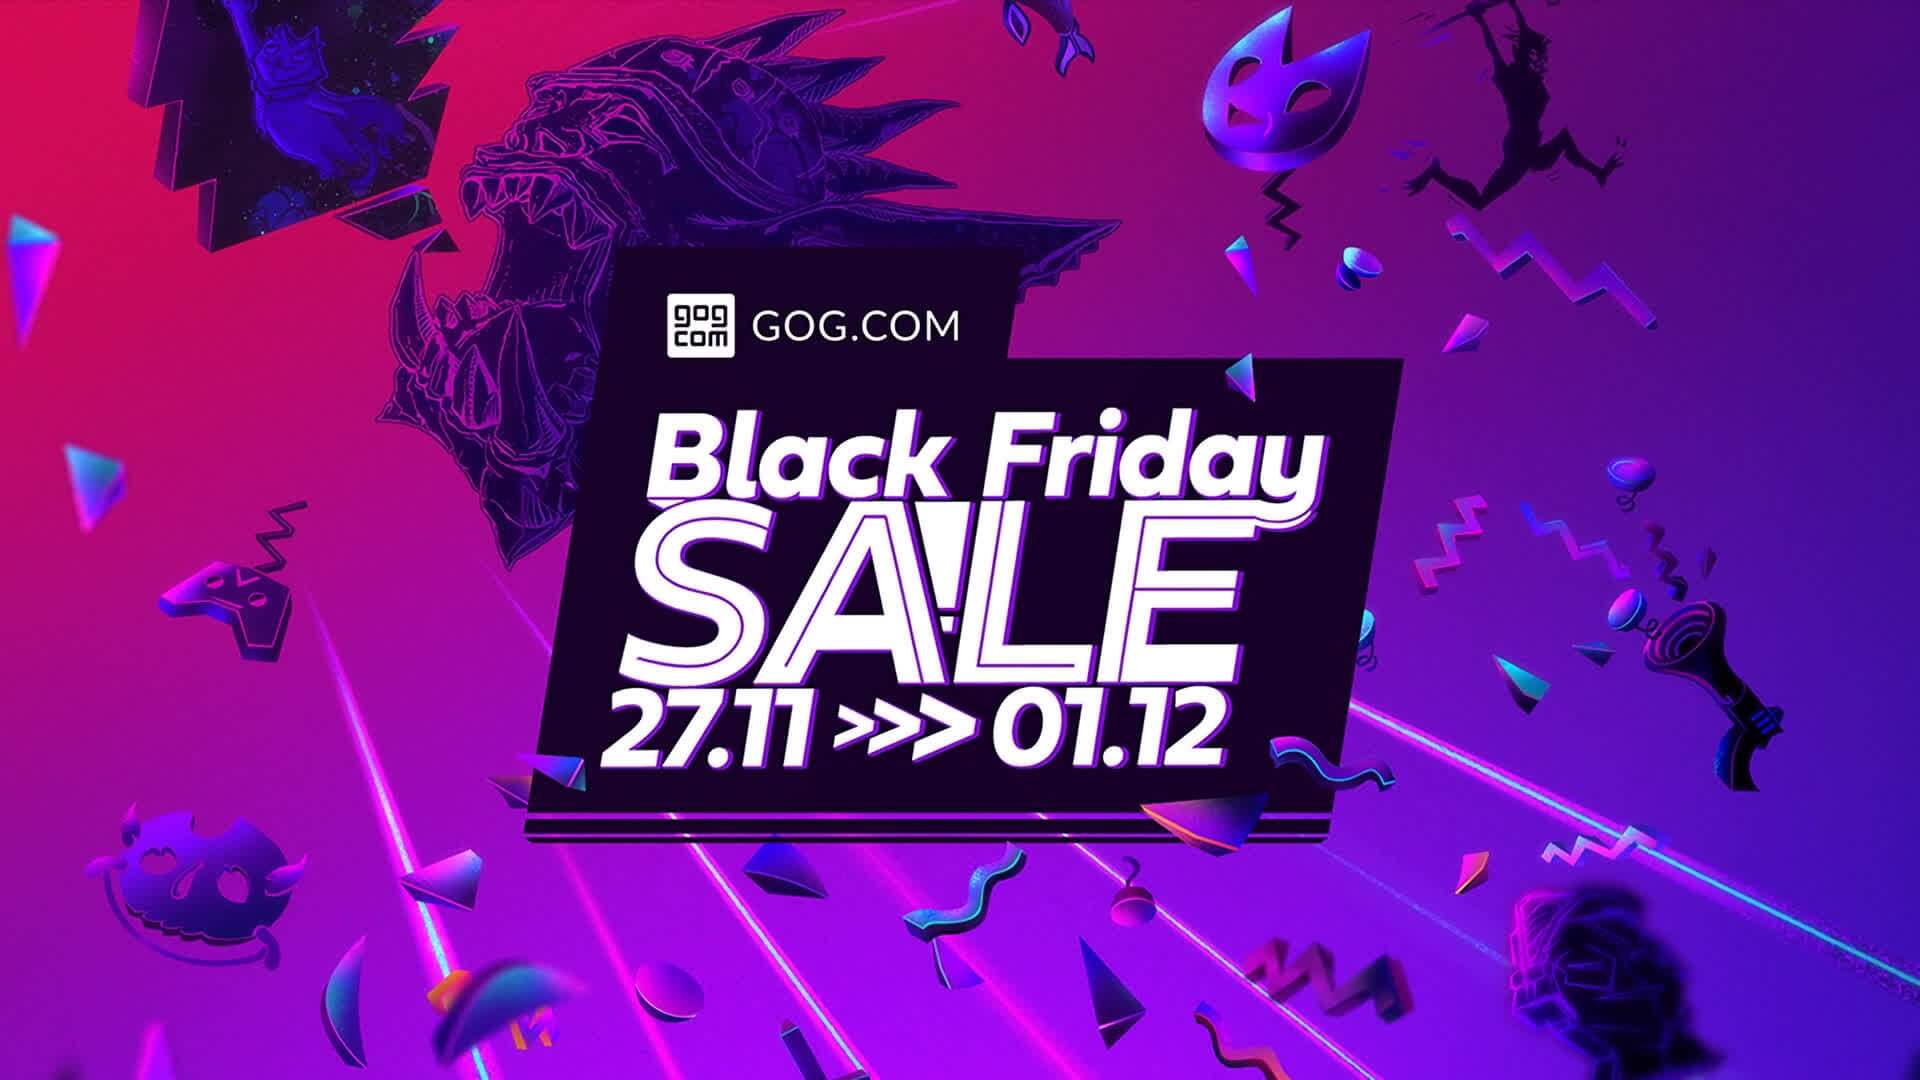 GOG Black Friday Sales Start Now with Flash Sales Changing Everyday